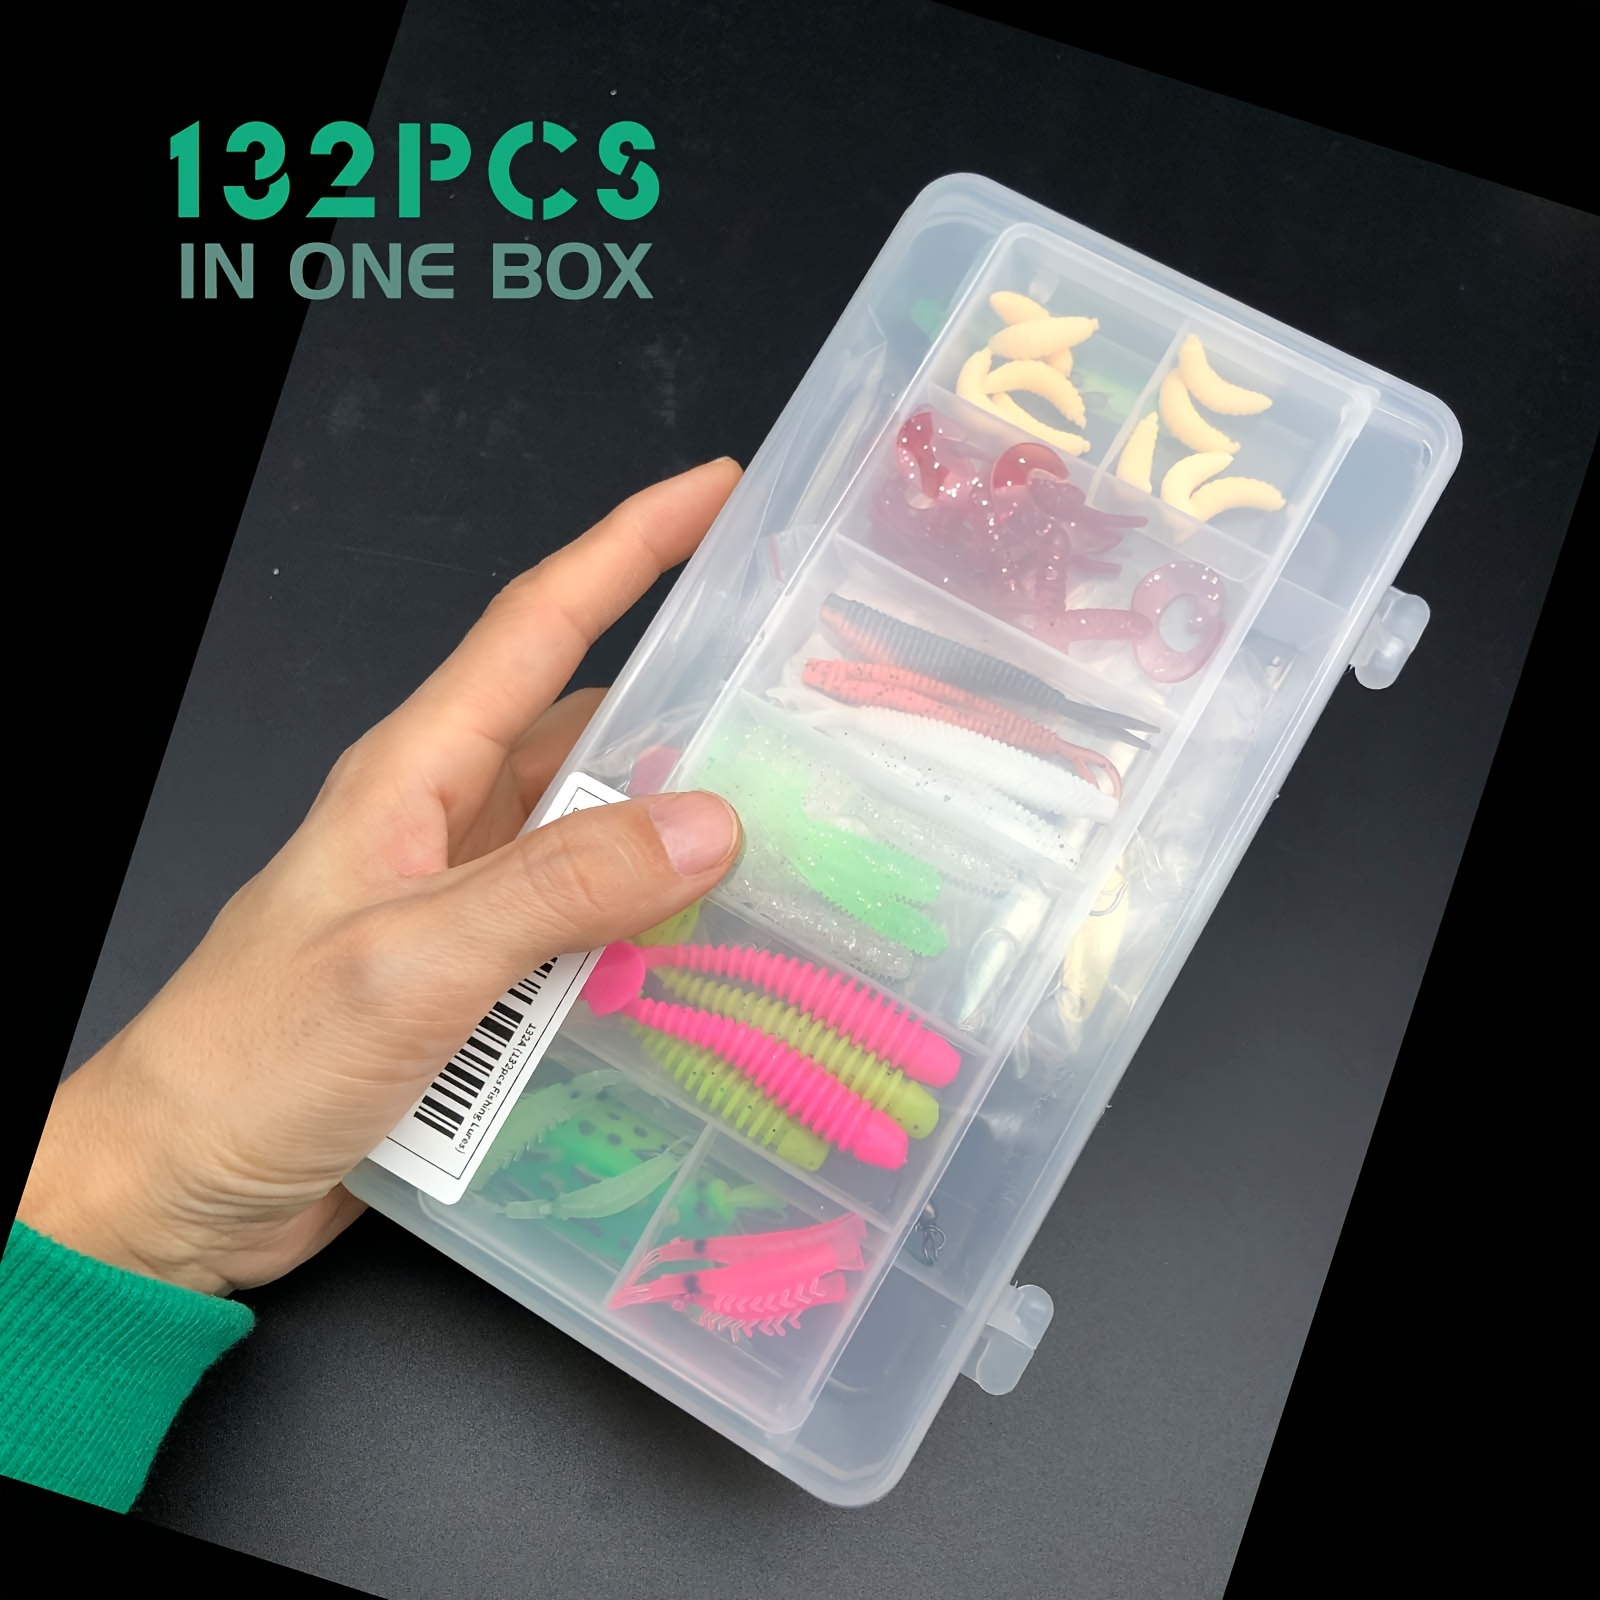 Fishing Lures Kit: Tackle Box Hard Lures Spoon Lures Soft - Temu Canada